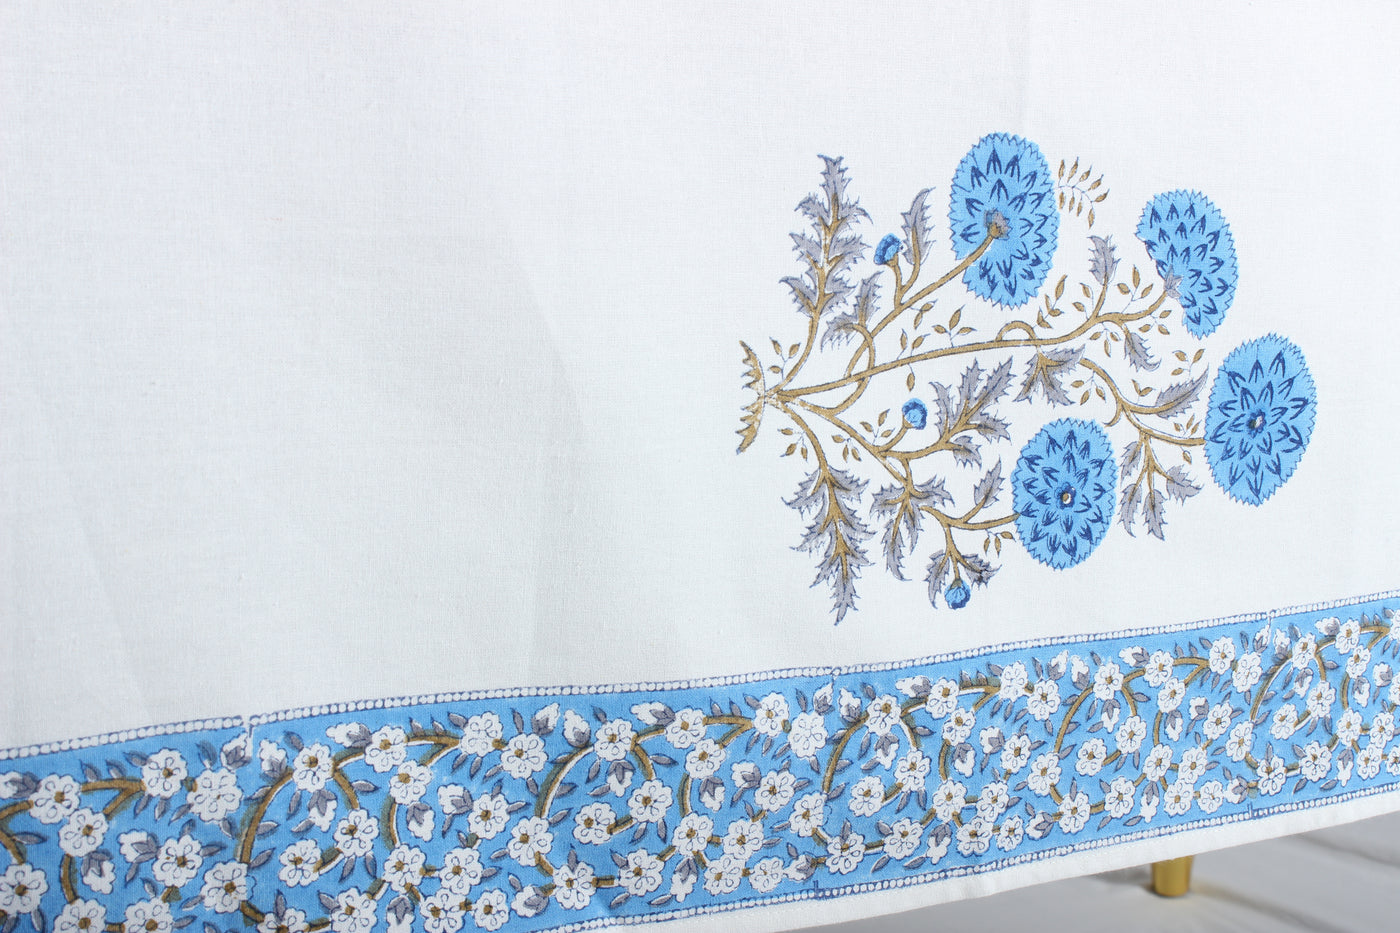 Fabricrush Lapis Blue Cotton Tablecloth, Hand block Print Floral Table Cloth for Kitchen Dining Linen I Thanksgiving, Christmas, Wedding, Fall Décor